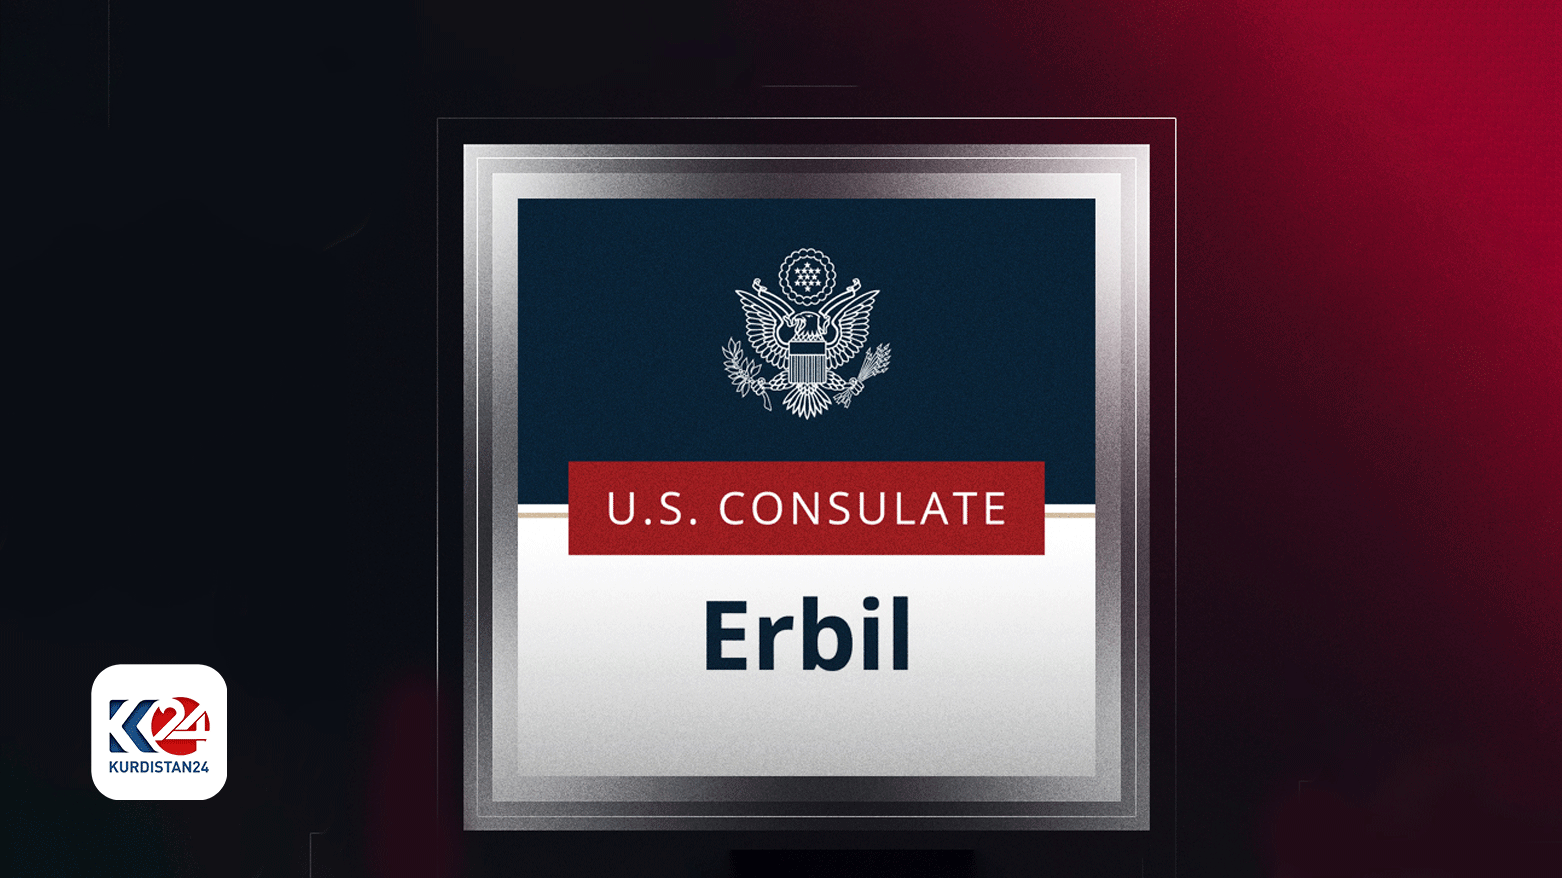 The logo of the US Consulate General in Erbil. (Photo: Designed by Kurdistan24)